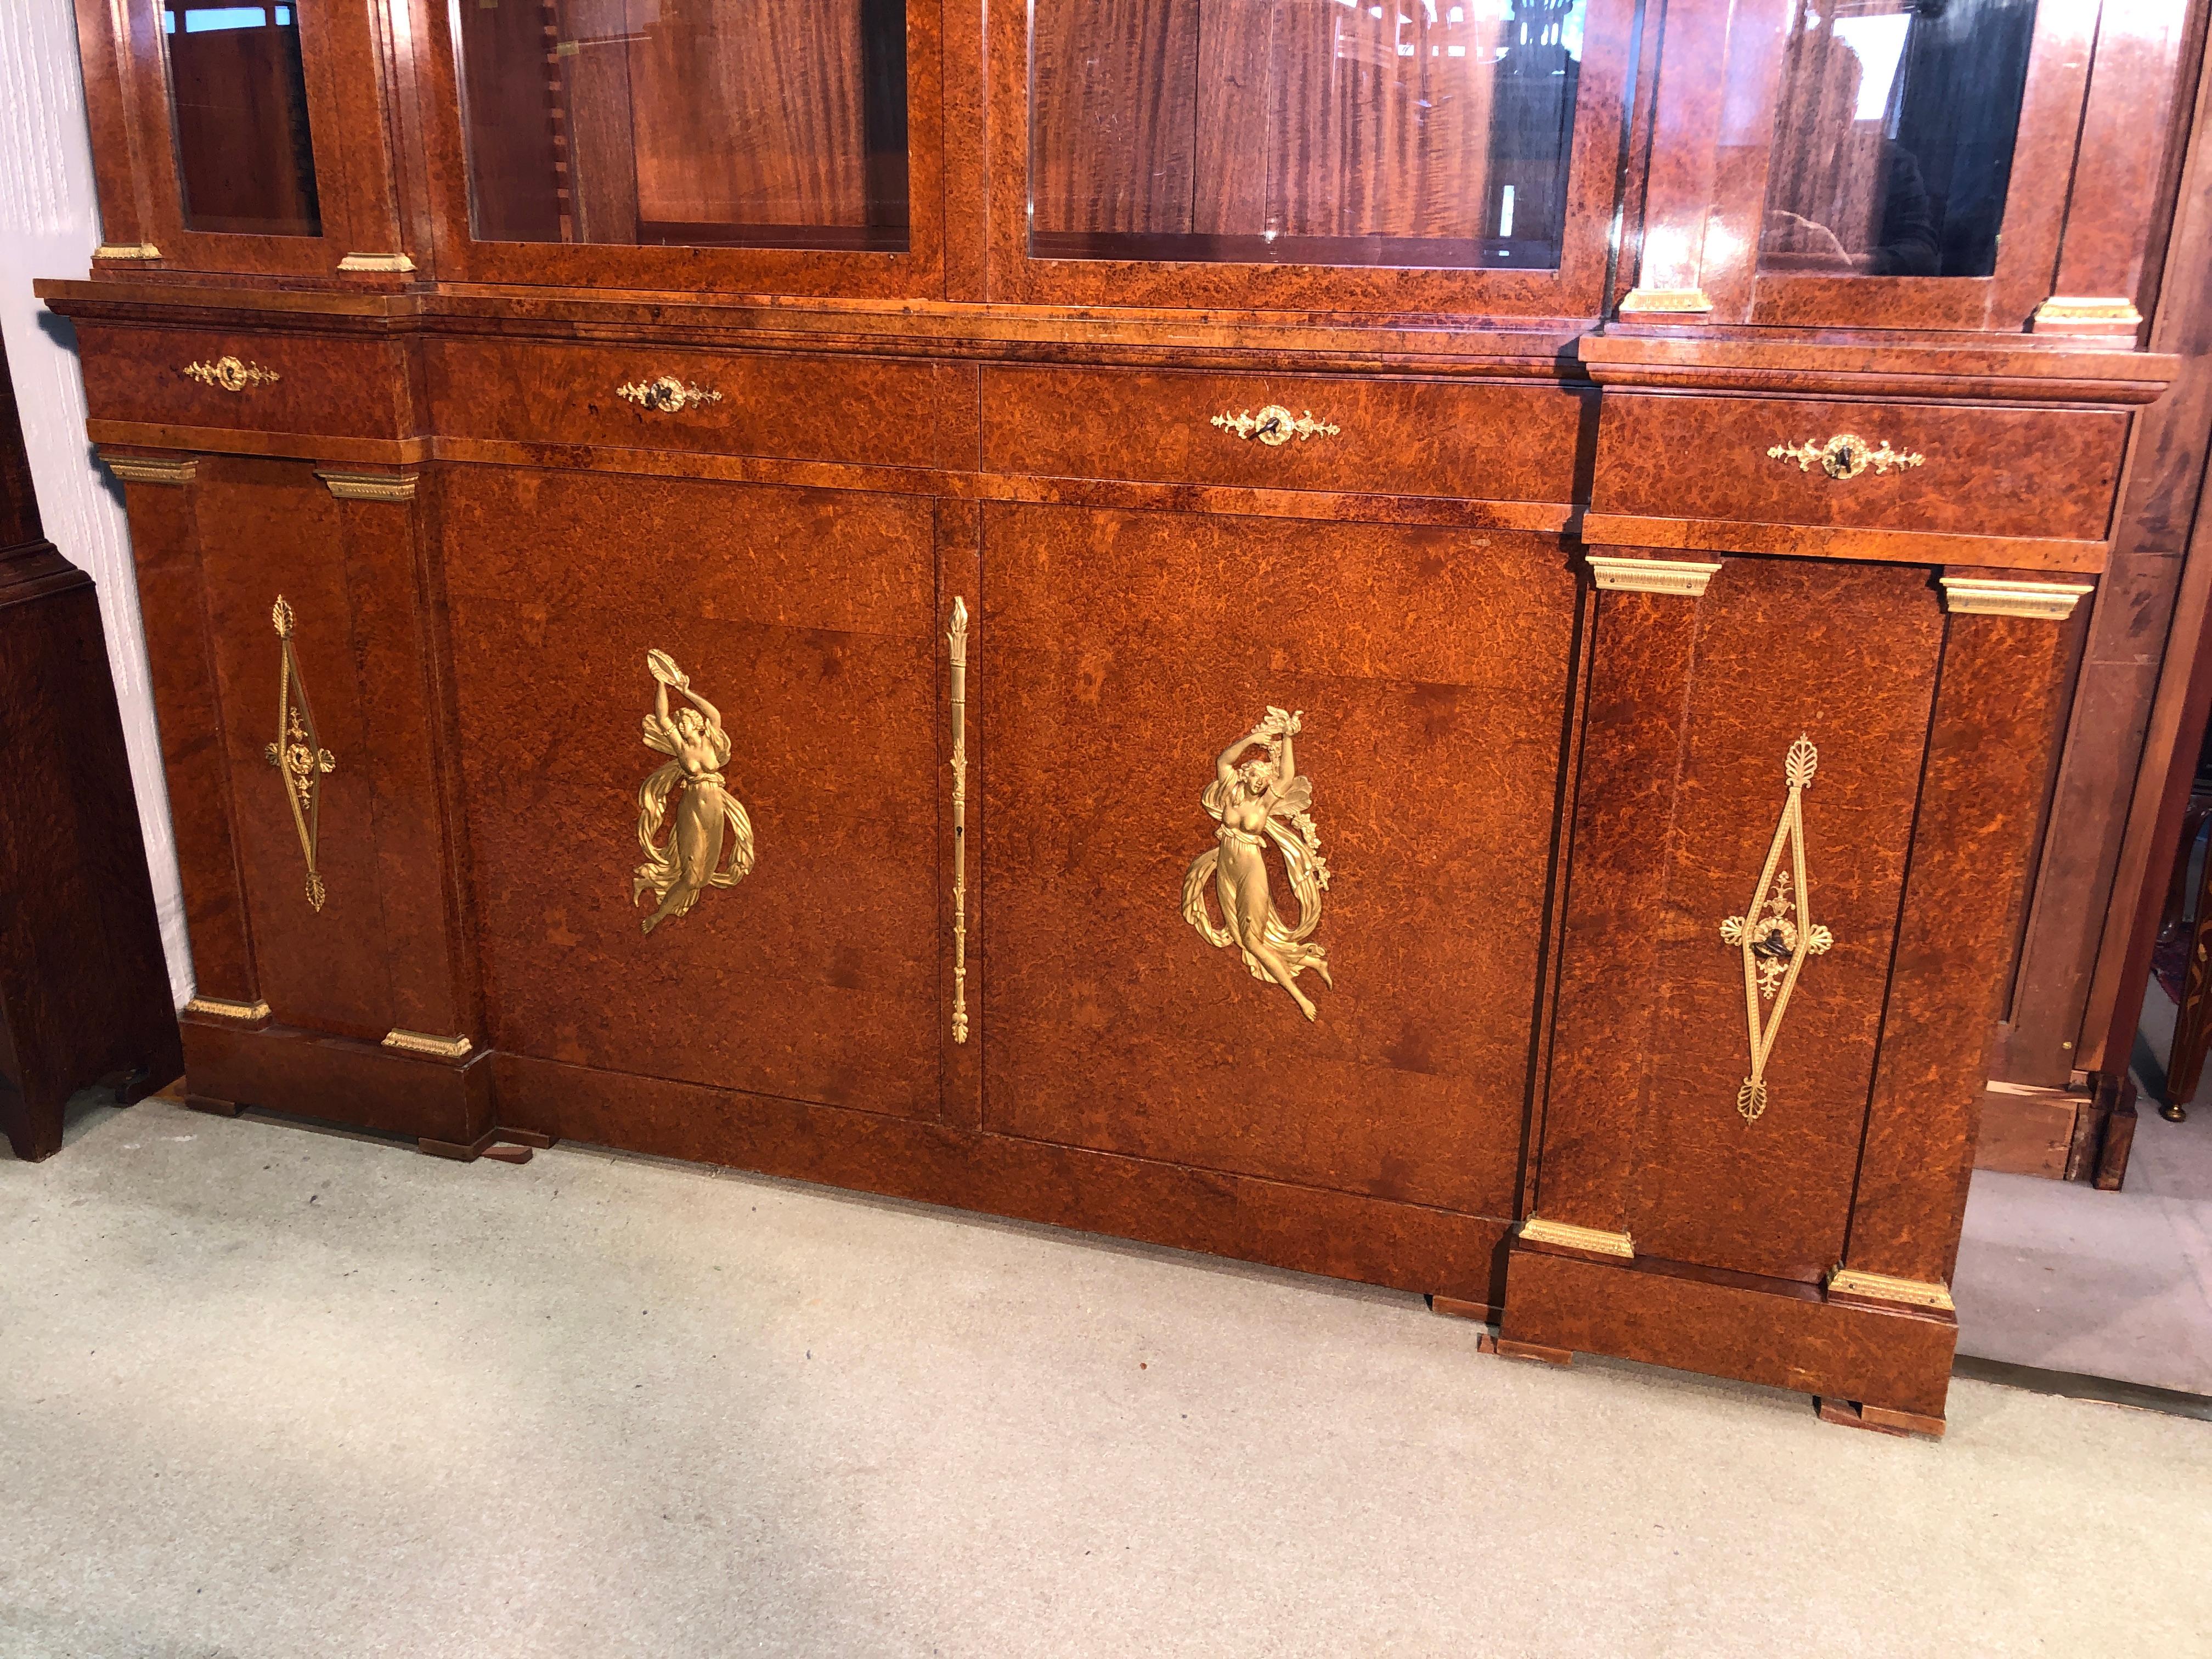 French cabinet in amboyna wood of the late 19th century, of great quality. Original gilt bronzes of excellent workmanship, in excellent condition, to be restored. Empire style. Unique, fantastic.